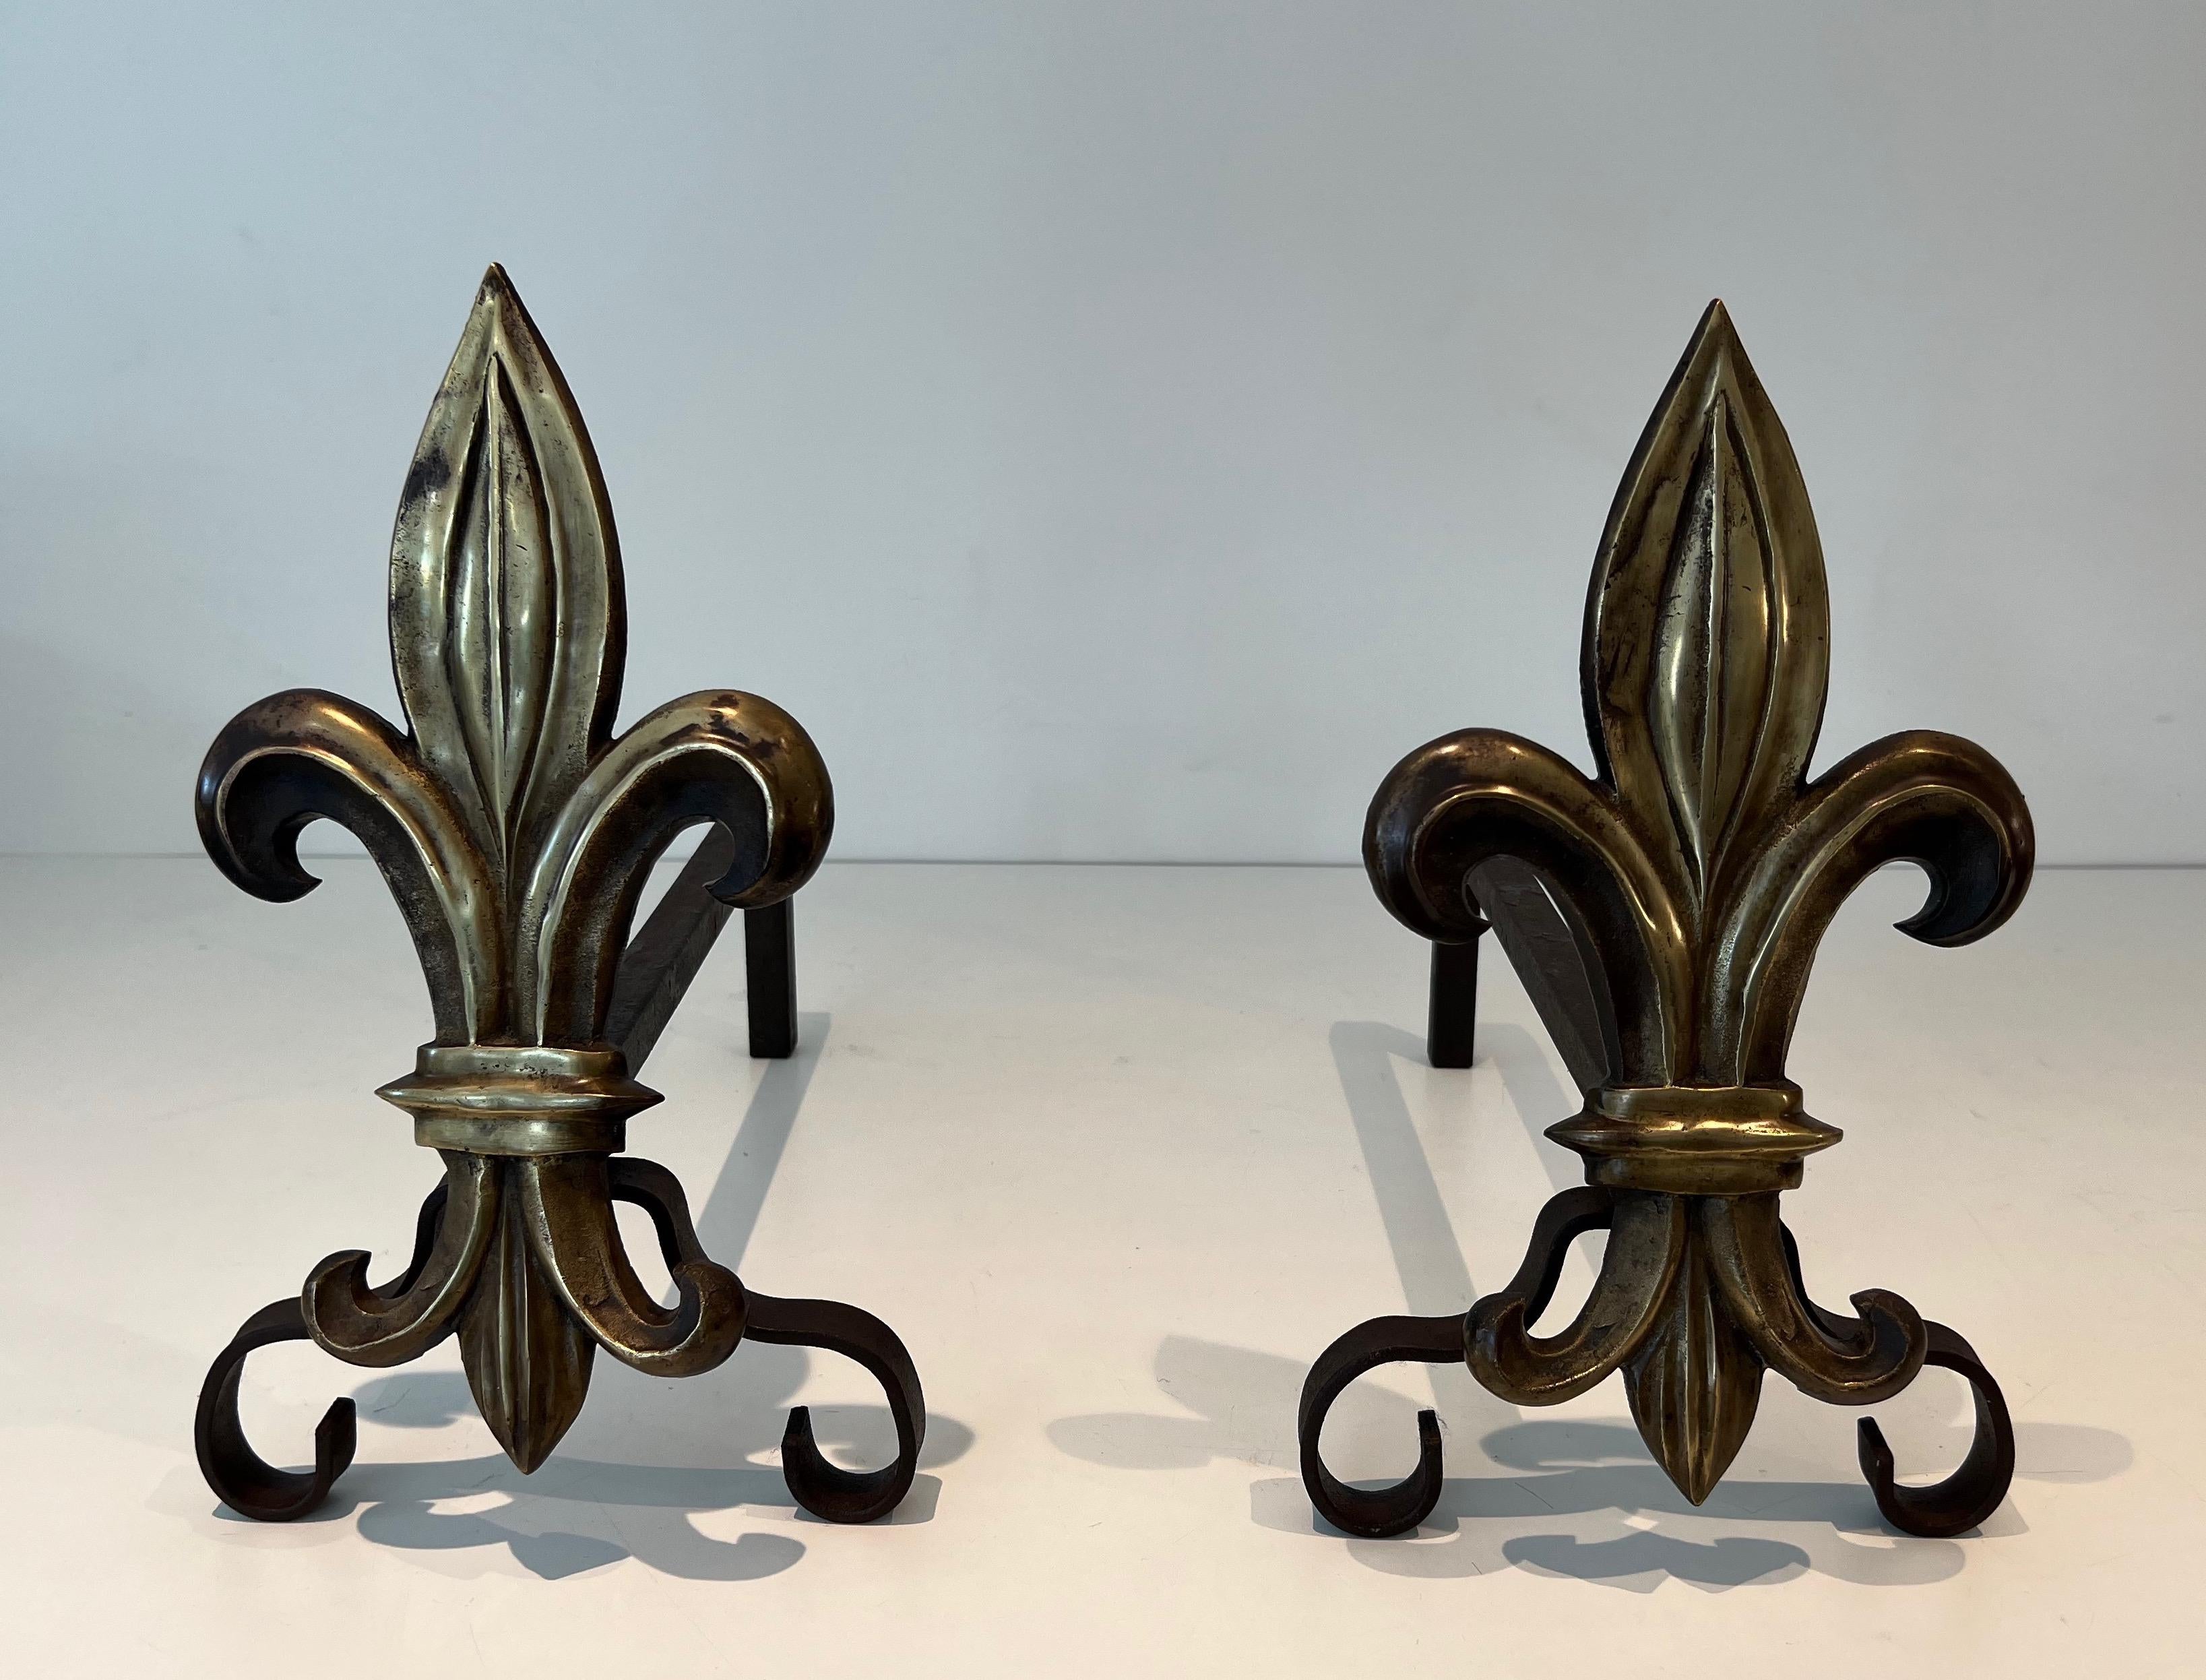 Pair of Bronze and Wrought Iron Andirons with a Lily Flower For Sale 6